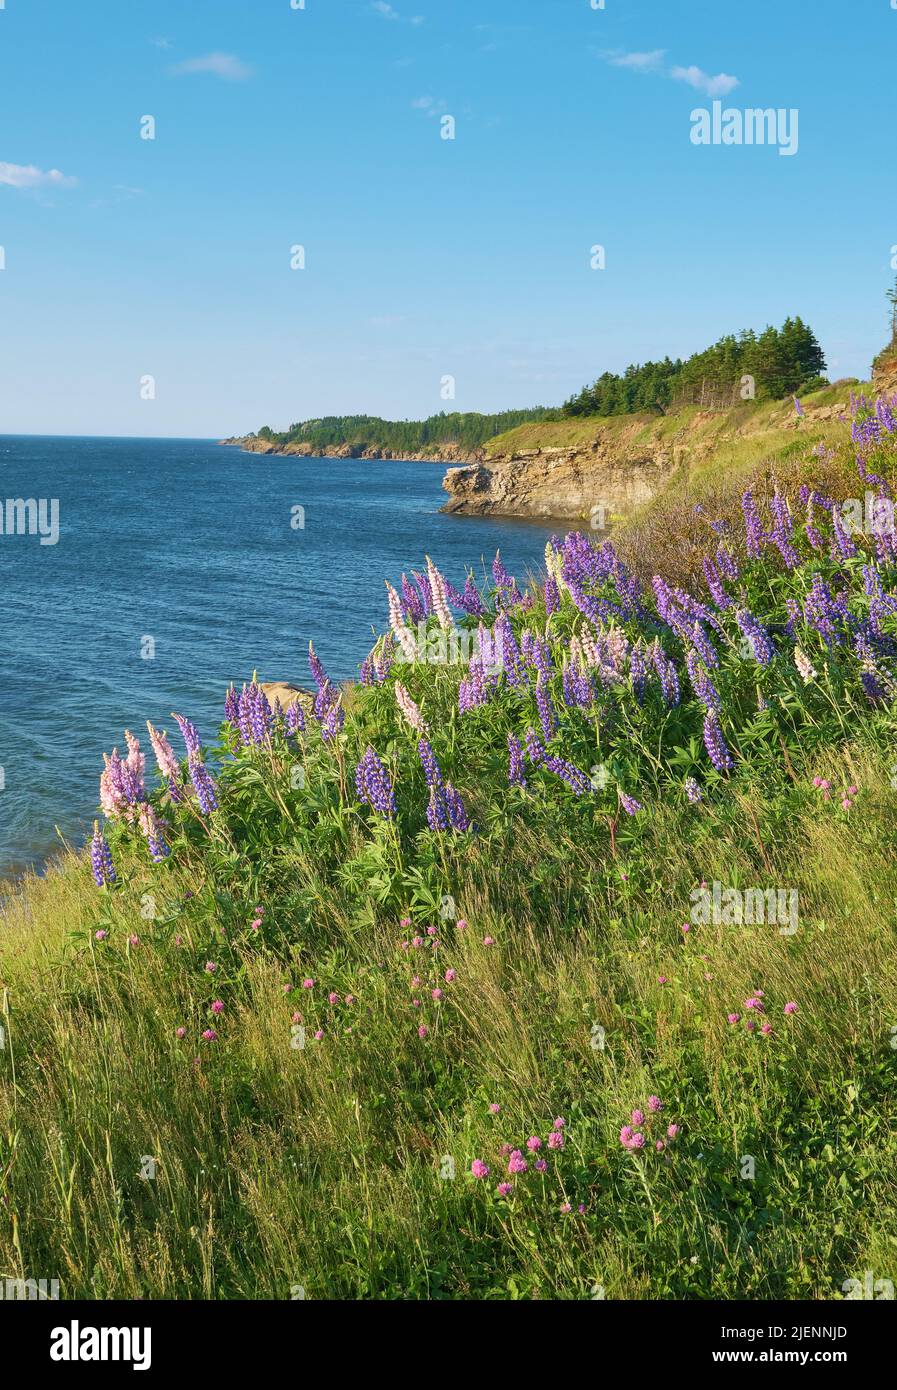 Wild lupins, Lupinus leguminosae, abound in late spring and summer in nova scotia.  These were photographed near the shore of South Bar Nova Scotia. Stock Photo